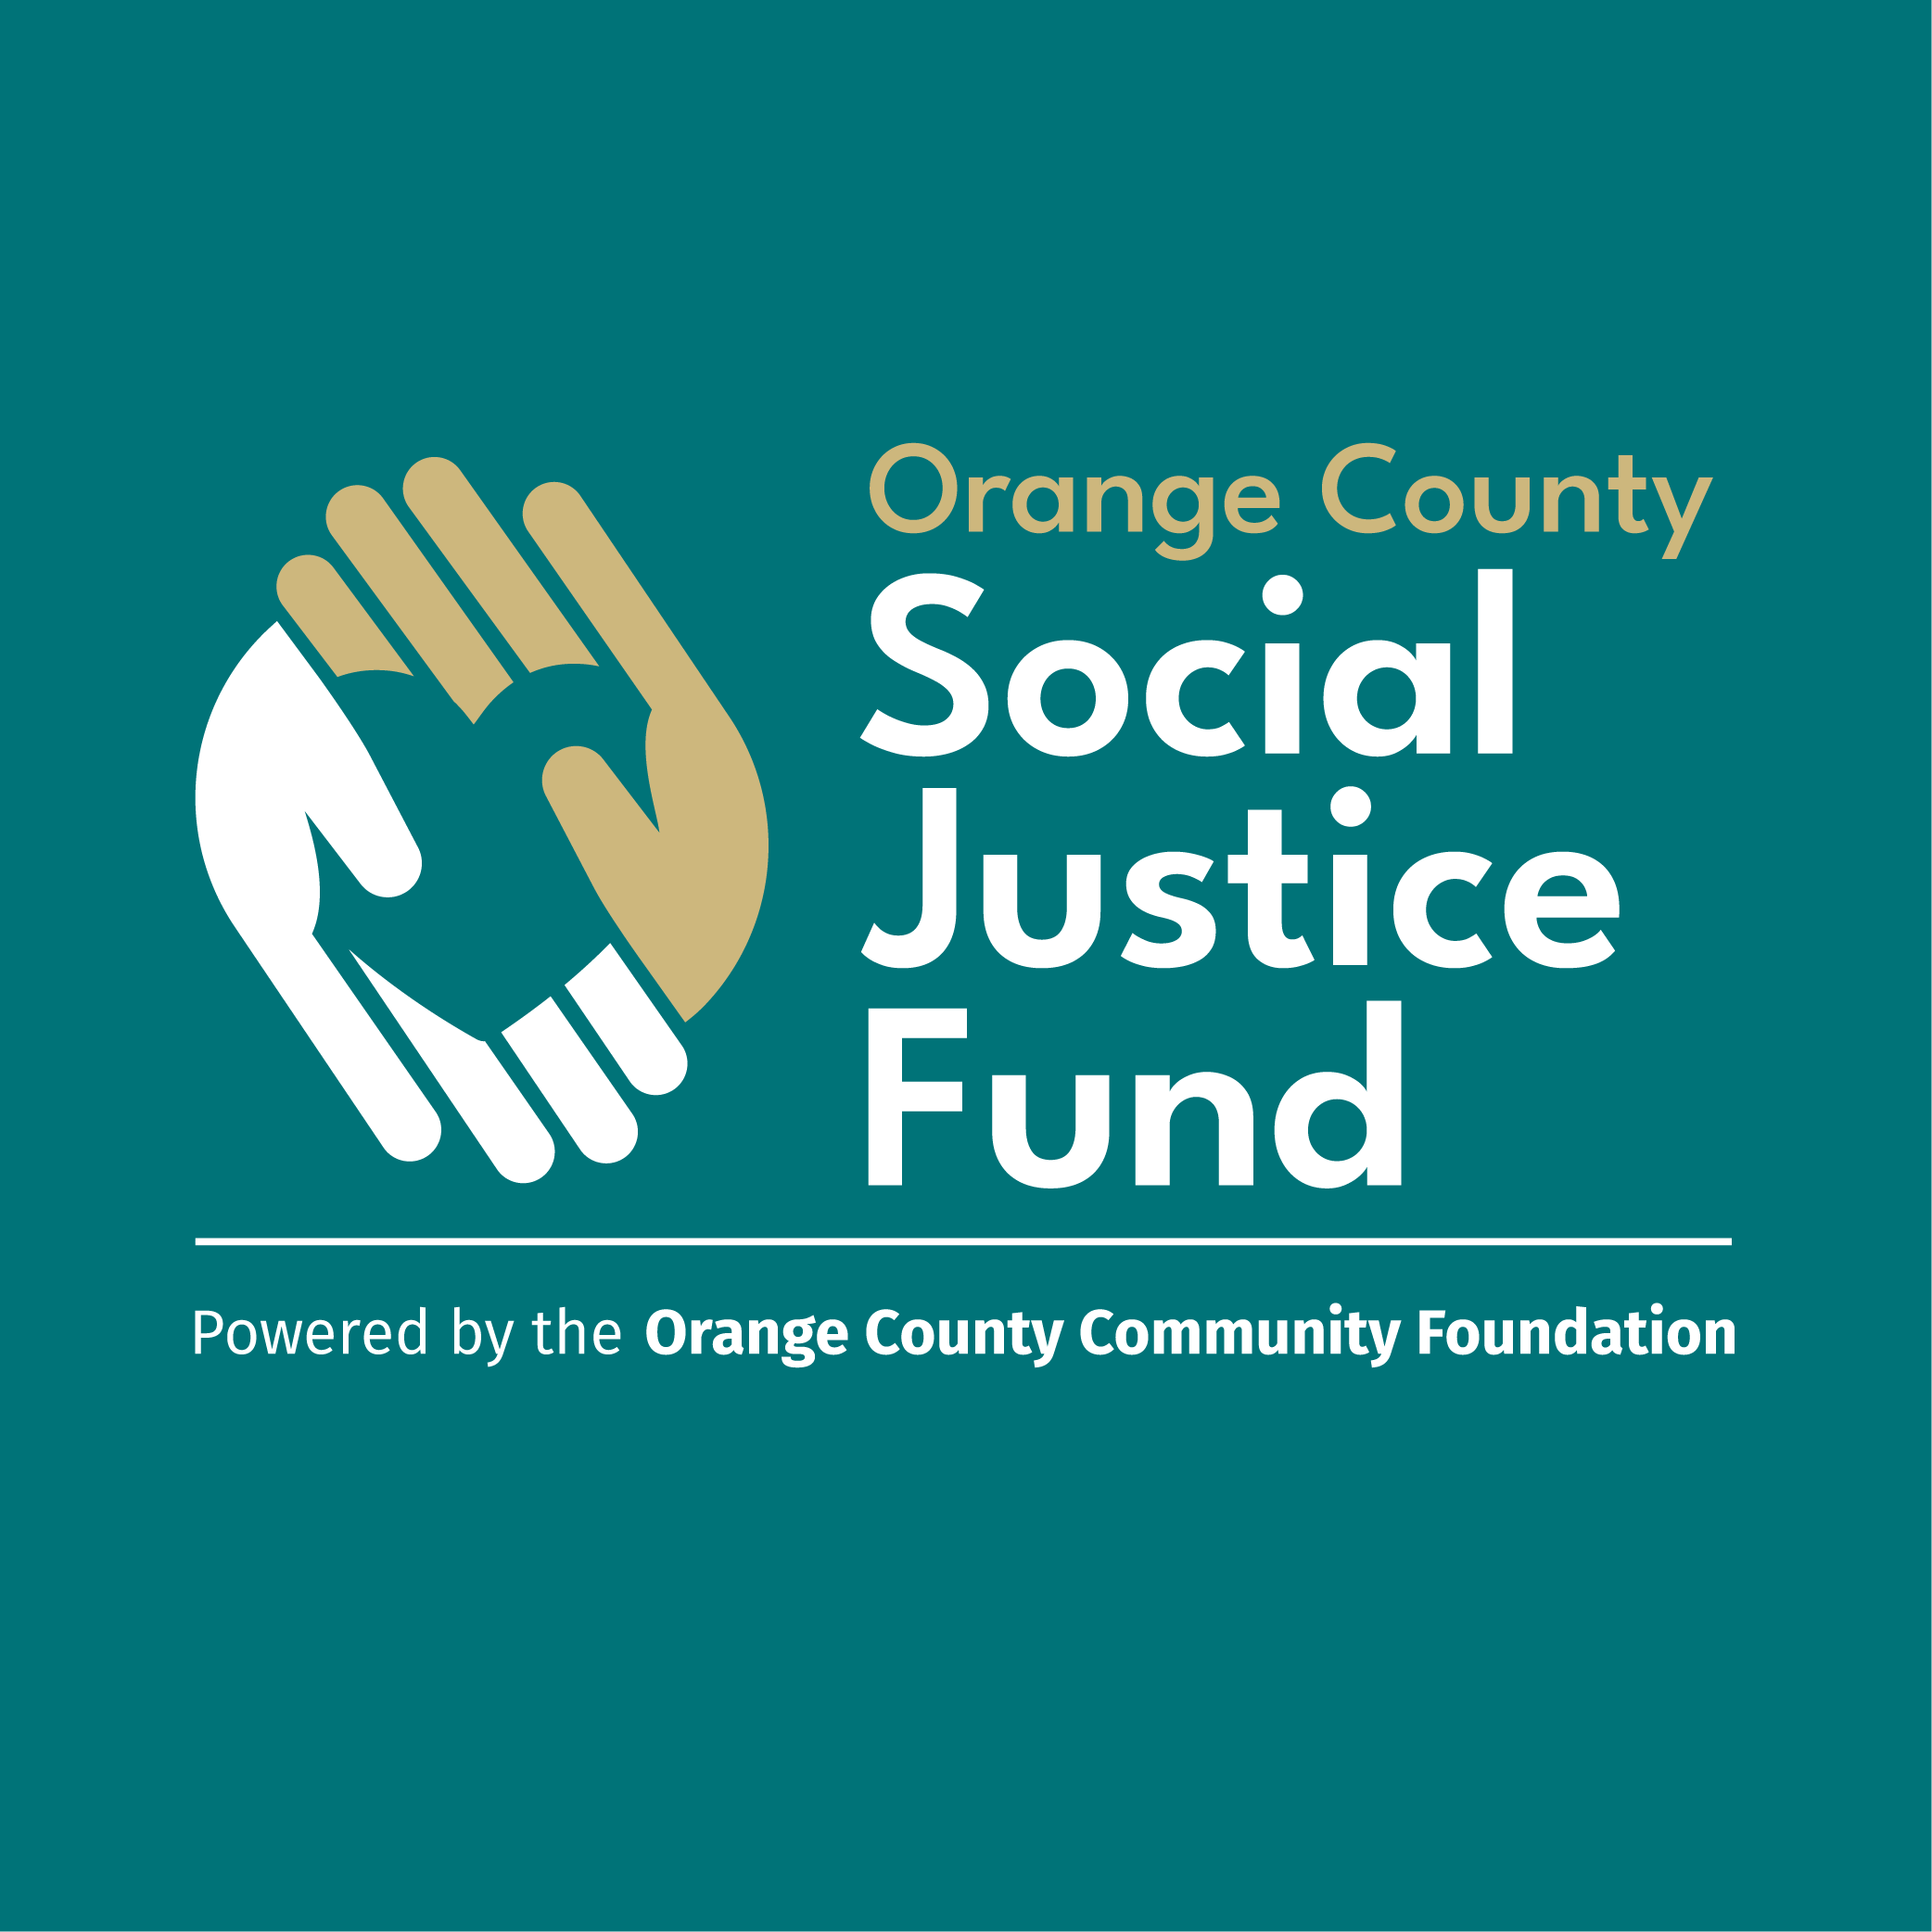 Orange County Social Justice Fund Launches